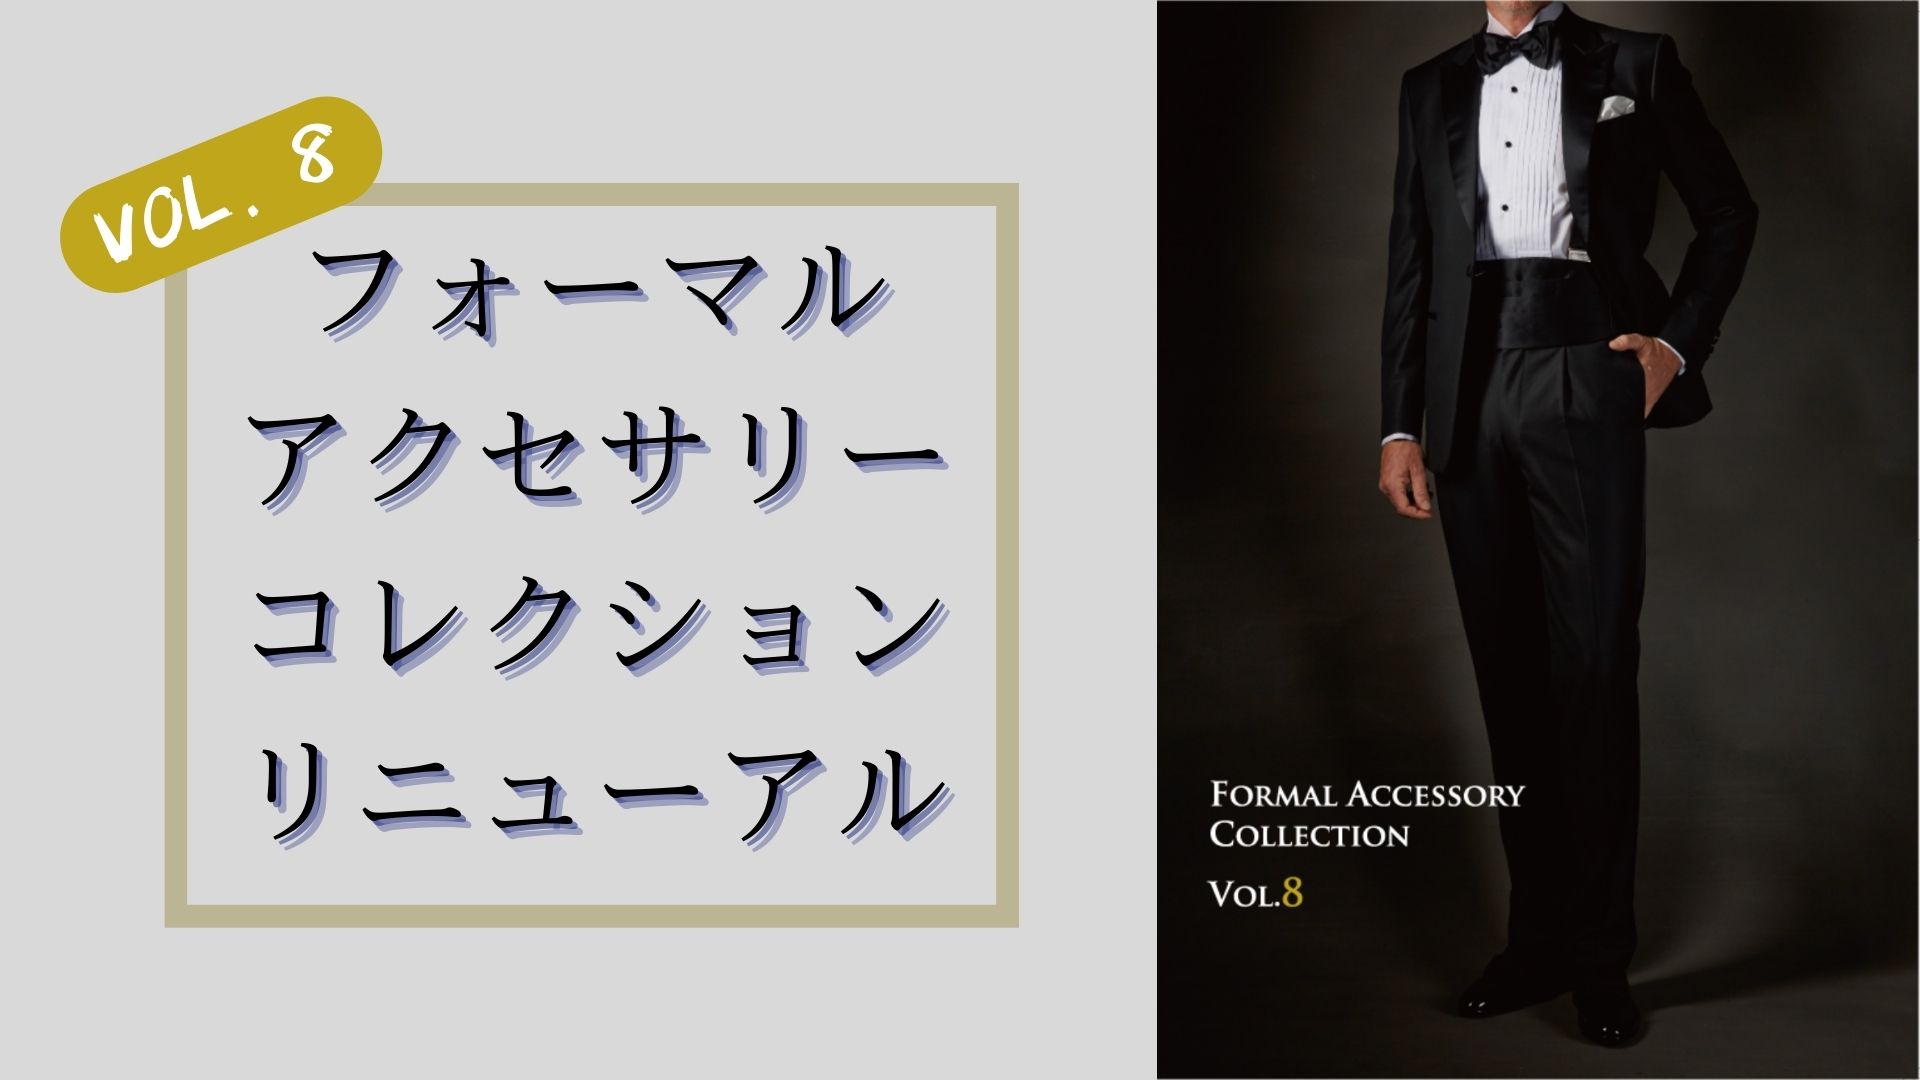 formal accessory collection vol.8 header image